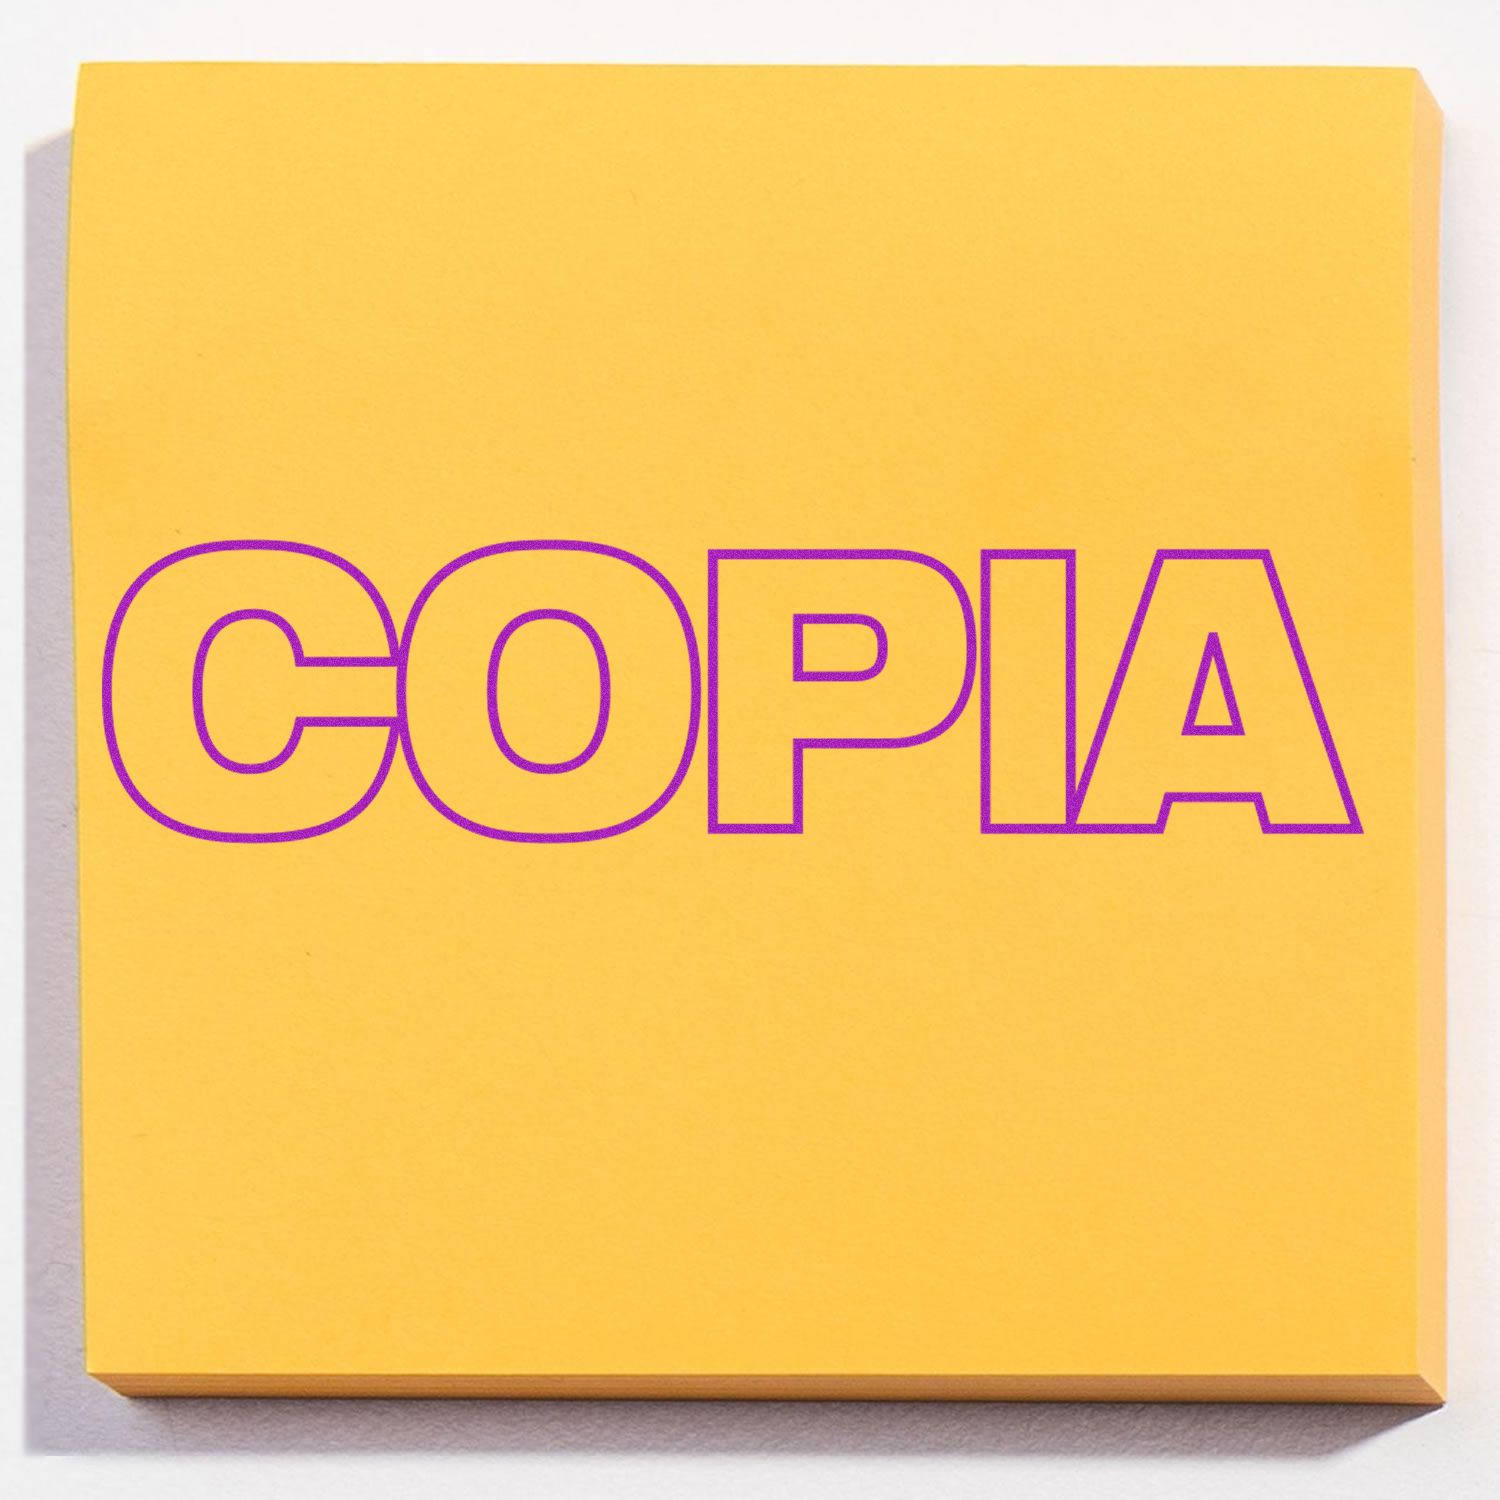 Large Pre-Inked Copia Stamp In Use